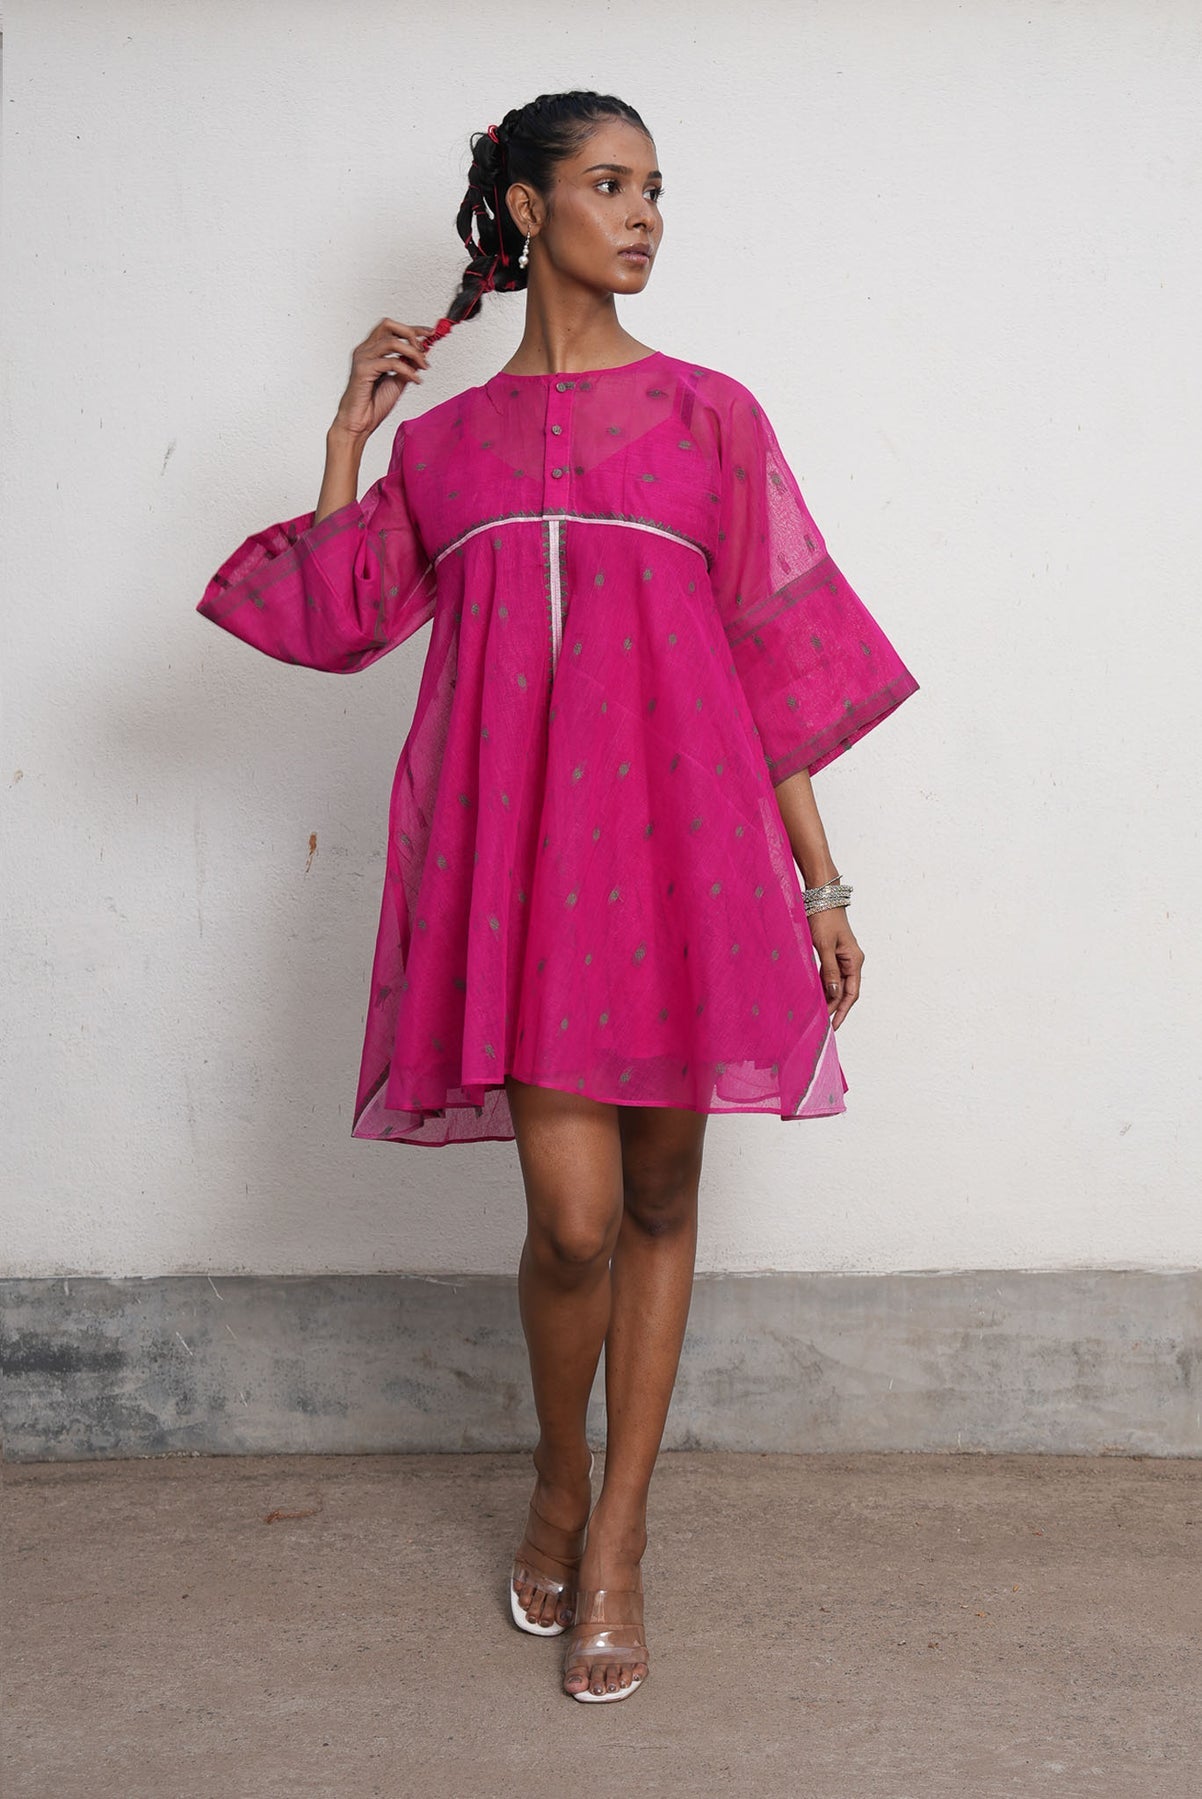 LIMITED EDITION - PINK DRESS IN PURE HANDWOVEN BENGALI COTTON (TAANT)